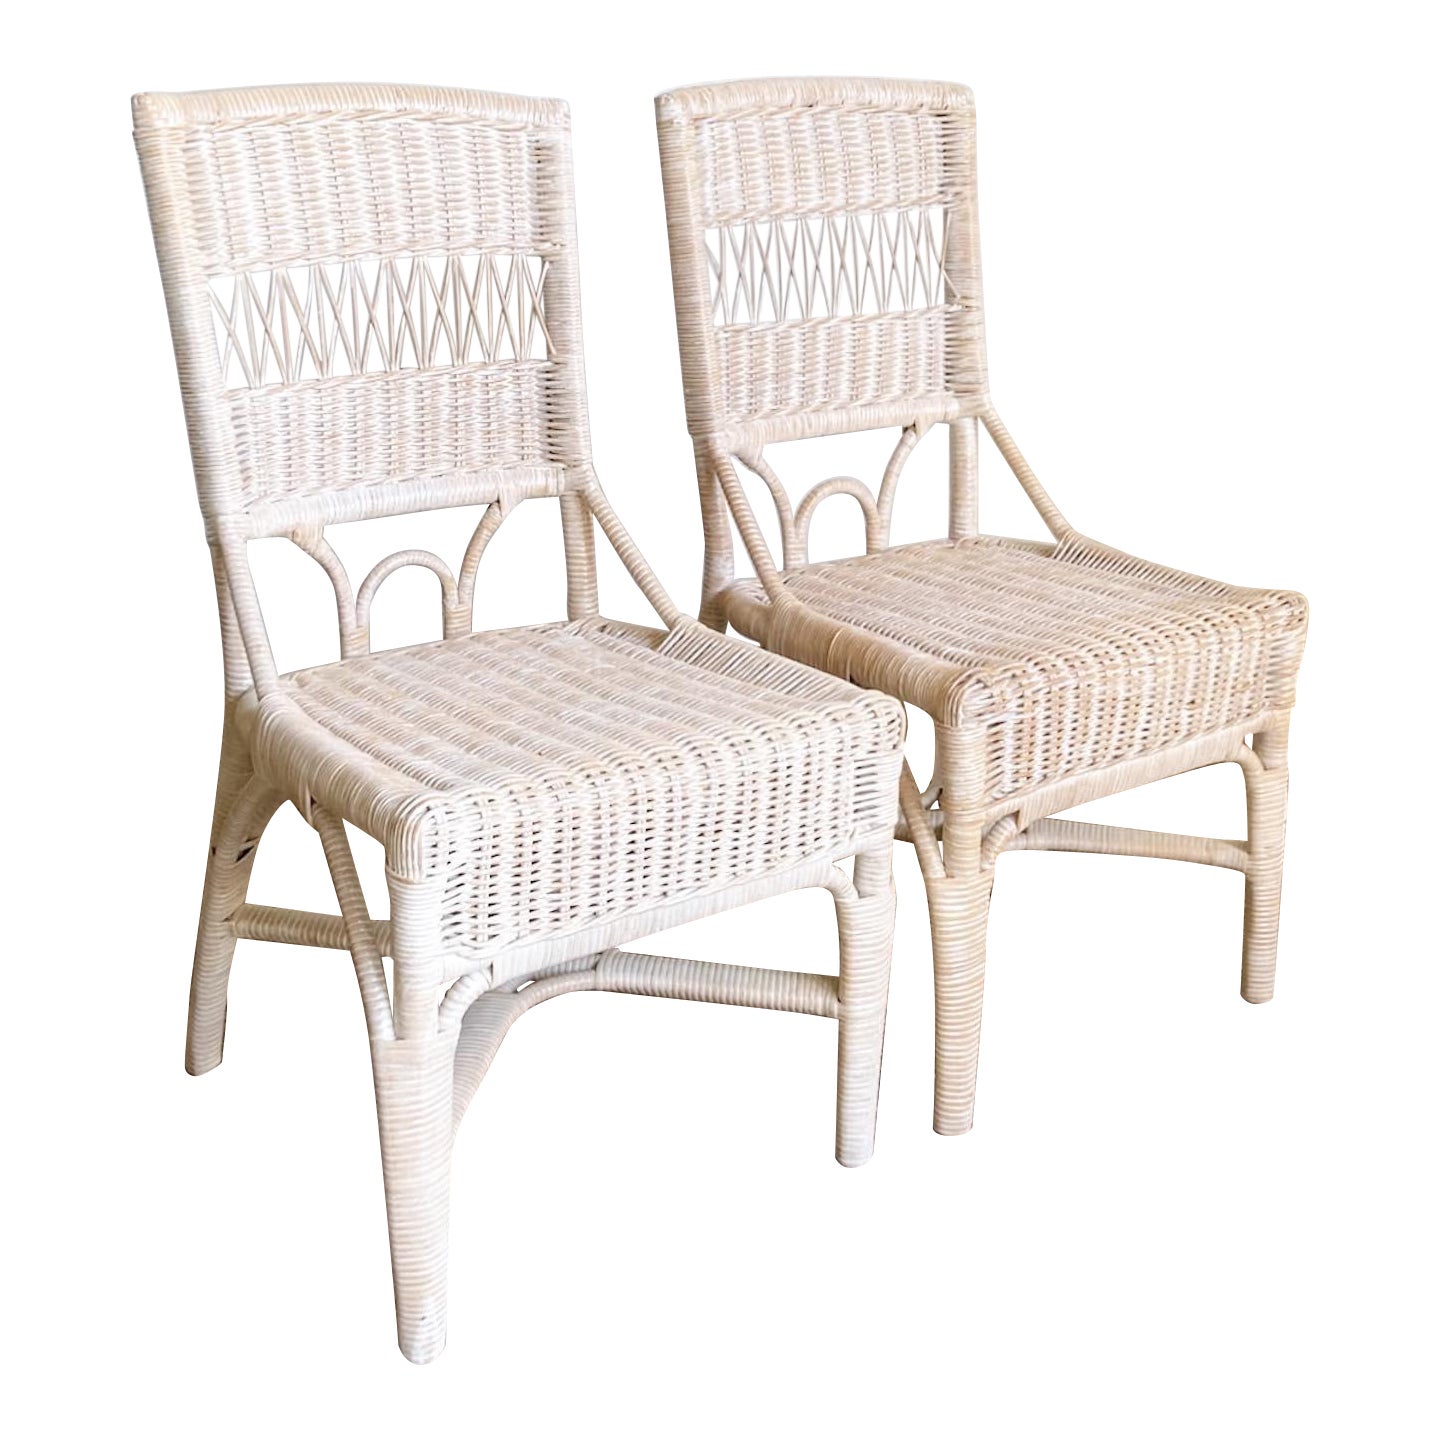 Boho Chic White Washed Wicker Rattan Side Chairs - a Pair For Sale